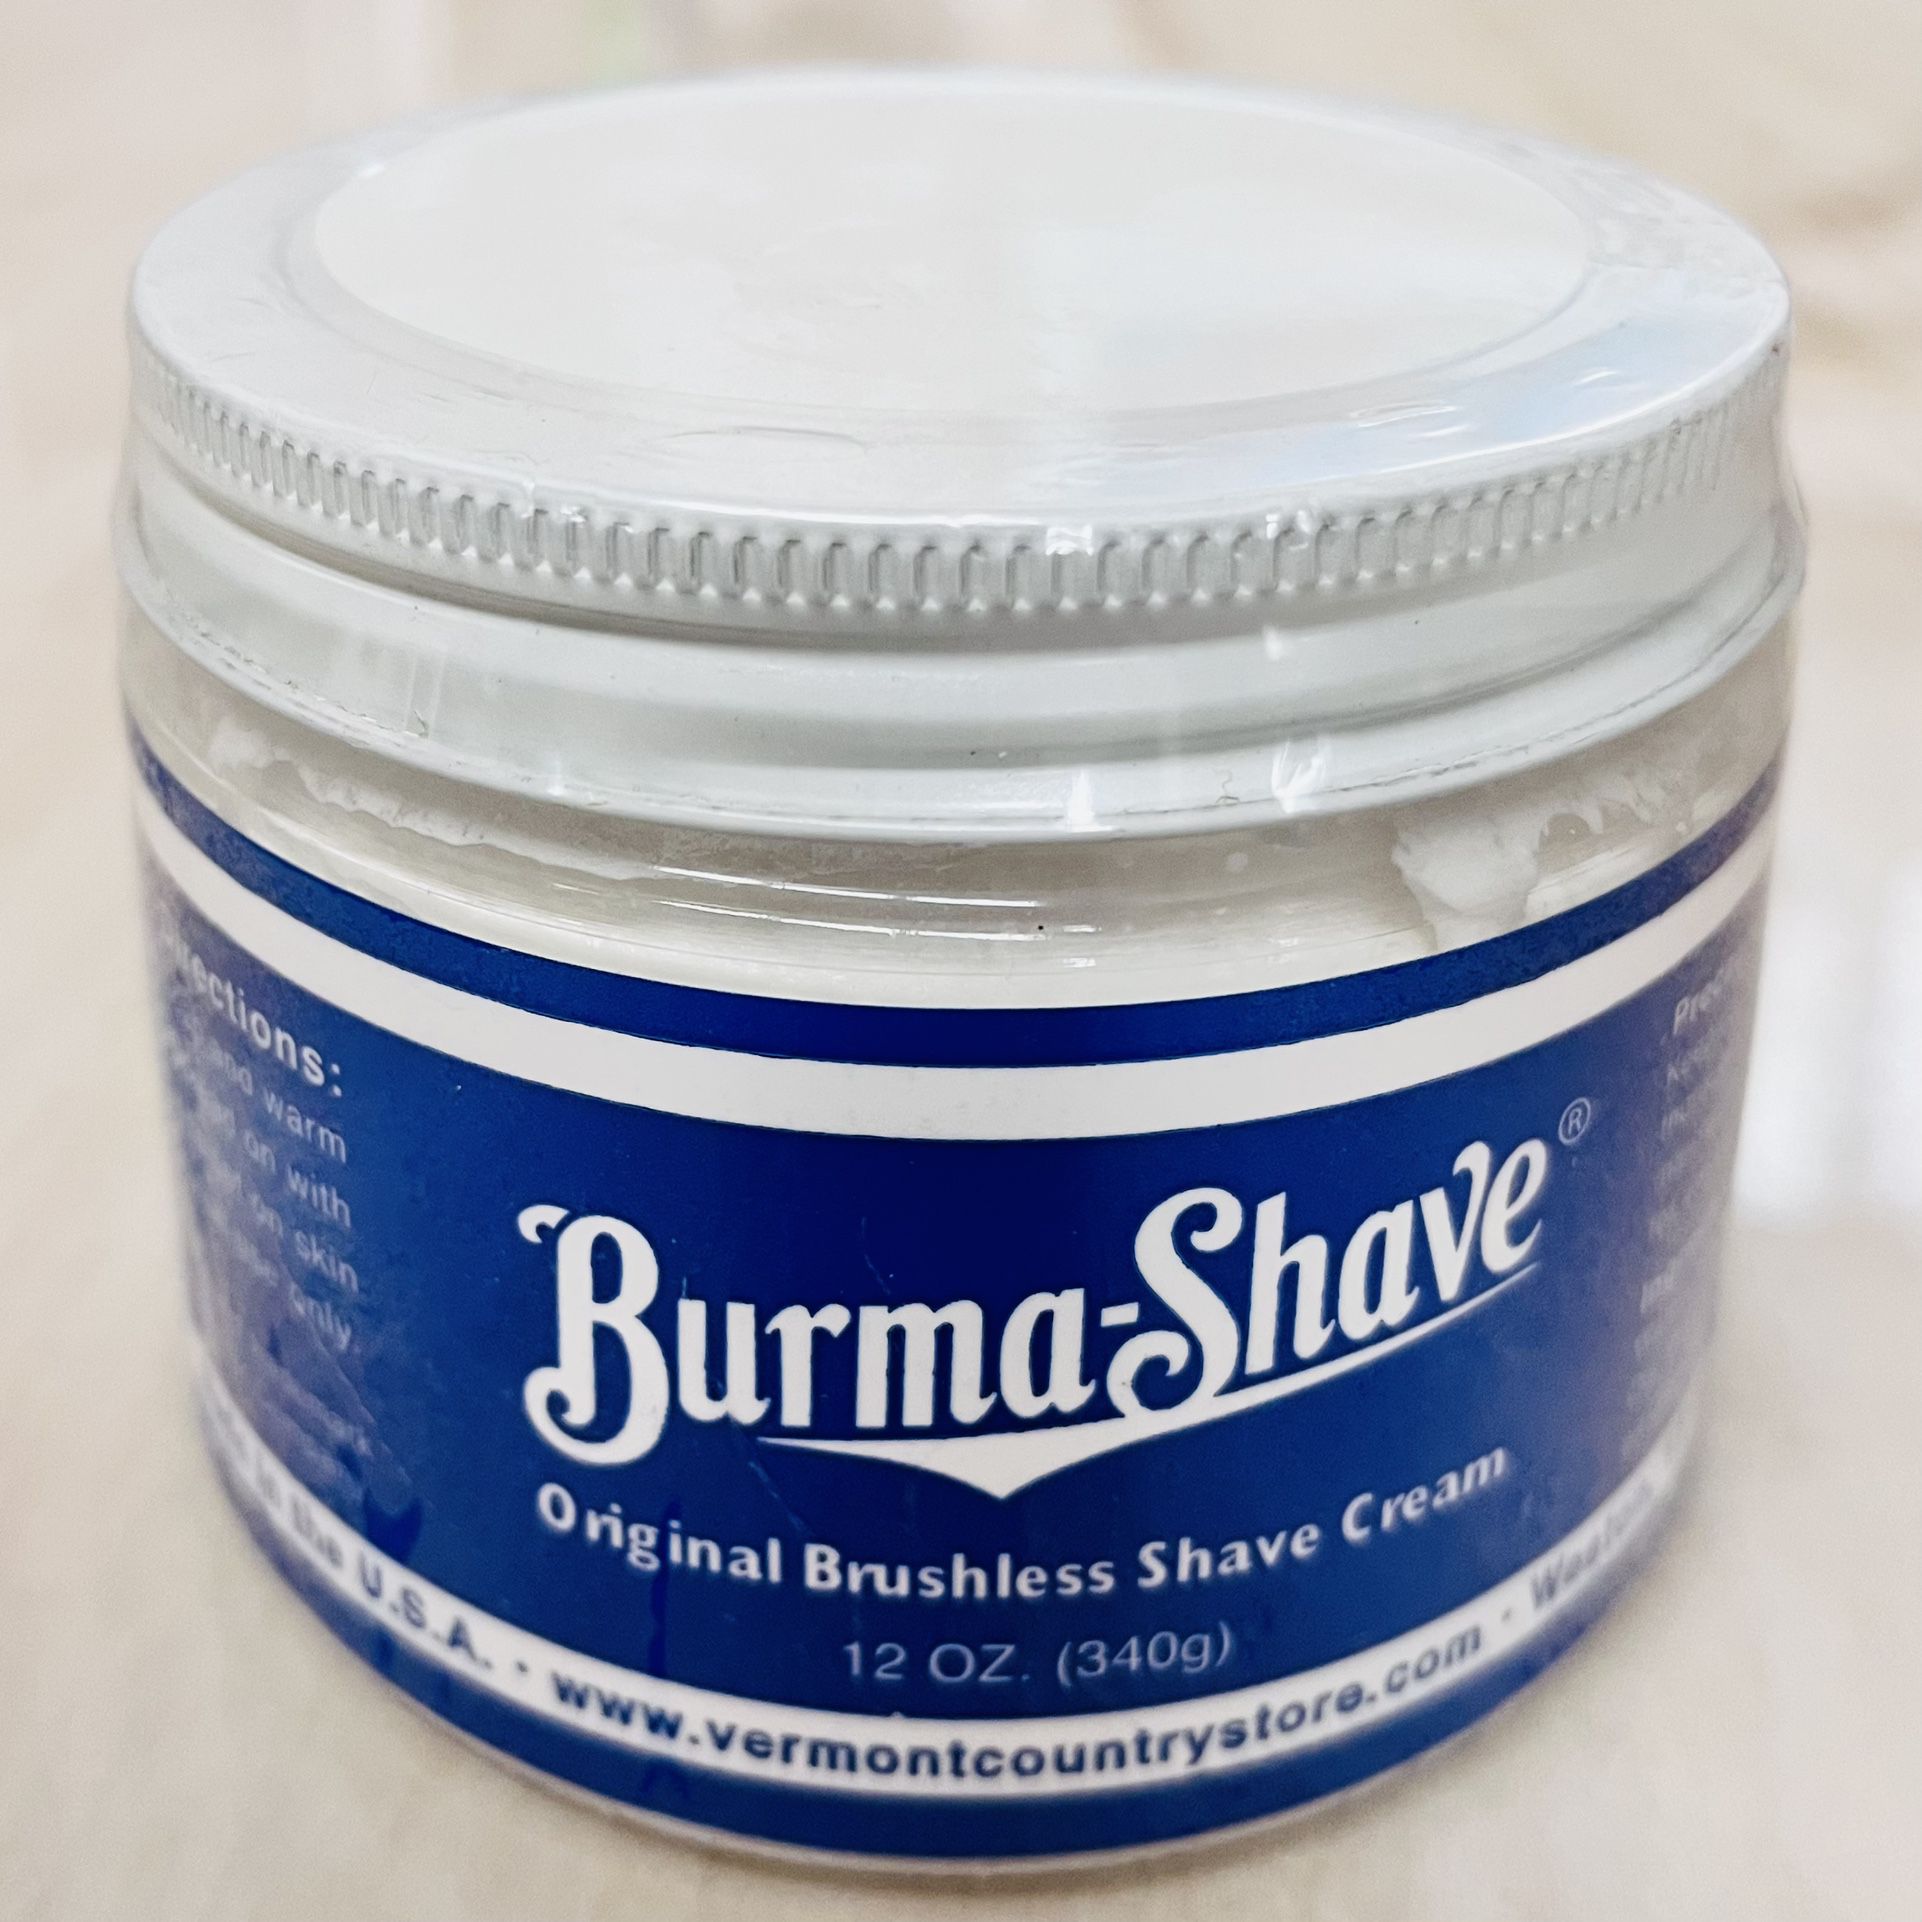 Burma-Shave Original Brushless Shave Cream 12OZ Made In USA Discontinued Sealed